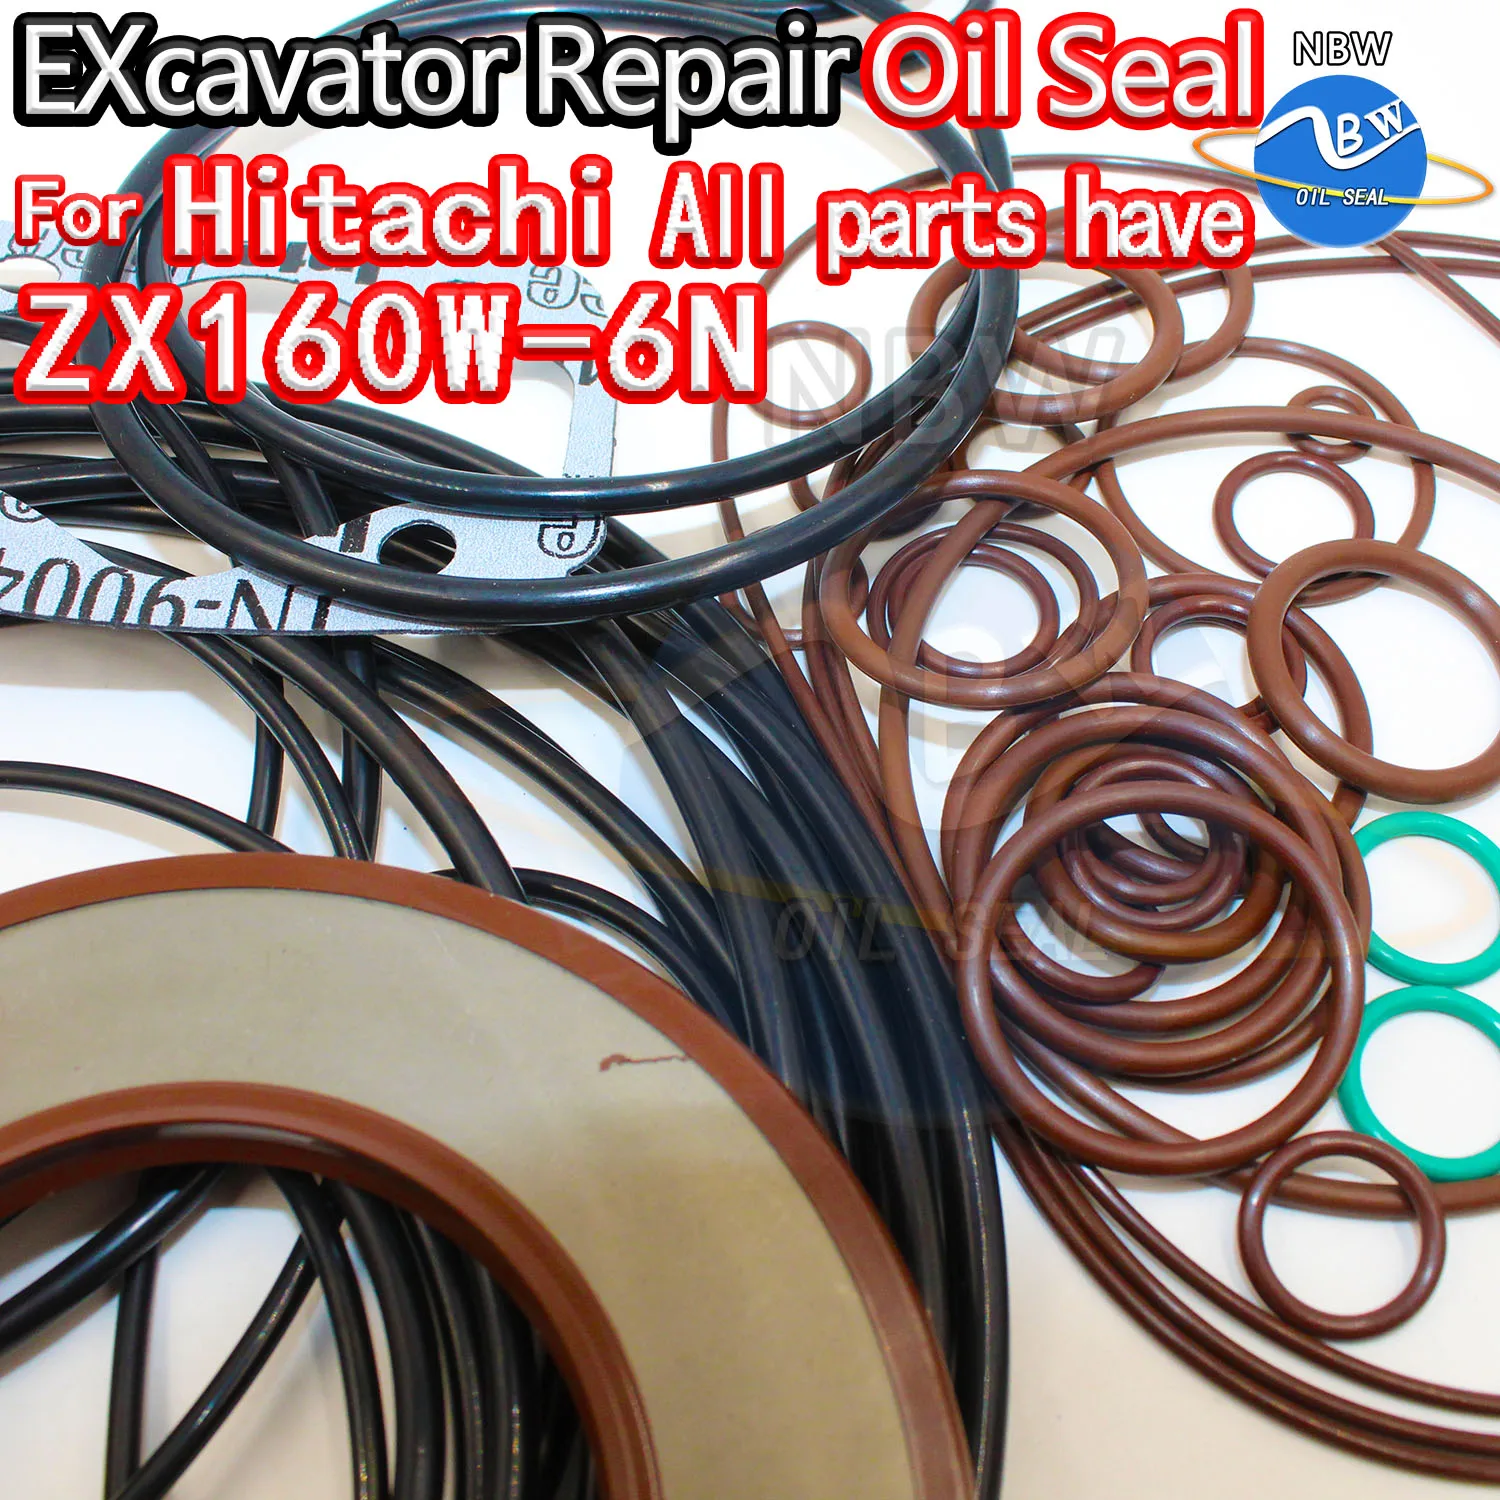 

For HITACHI ZX160W-6N Excavator Oil Seal Kit High Quality Repair Hit ZX160W 6N Center Joint Gasket Nitrile NBR Nok Washer Skf